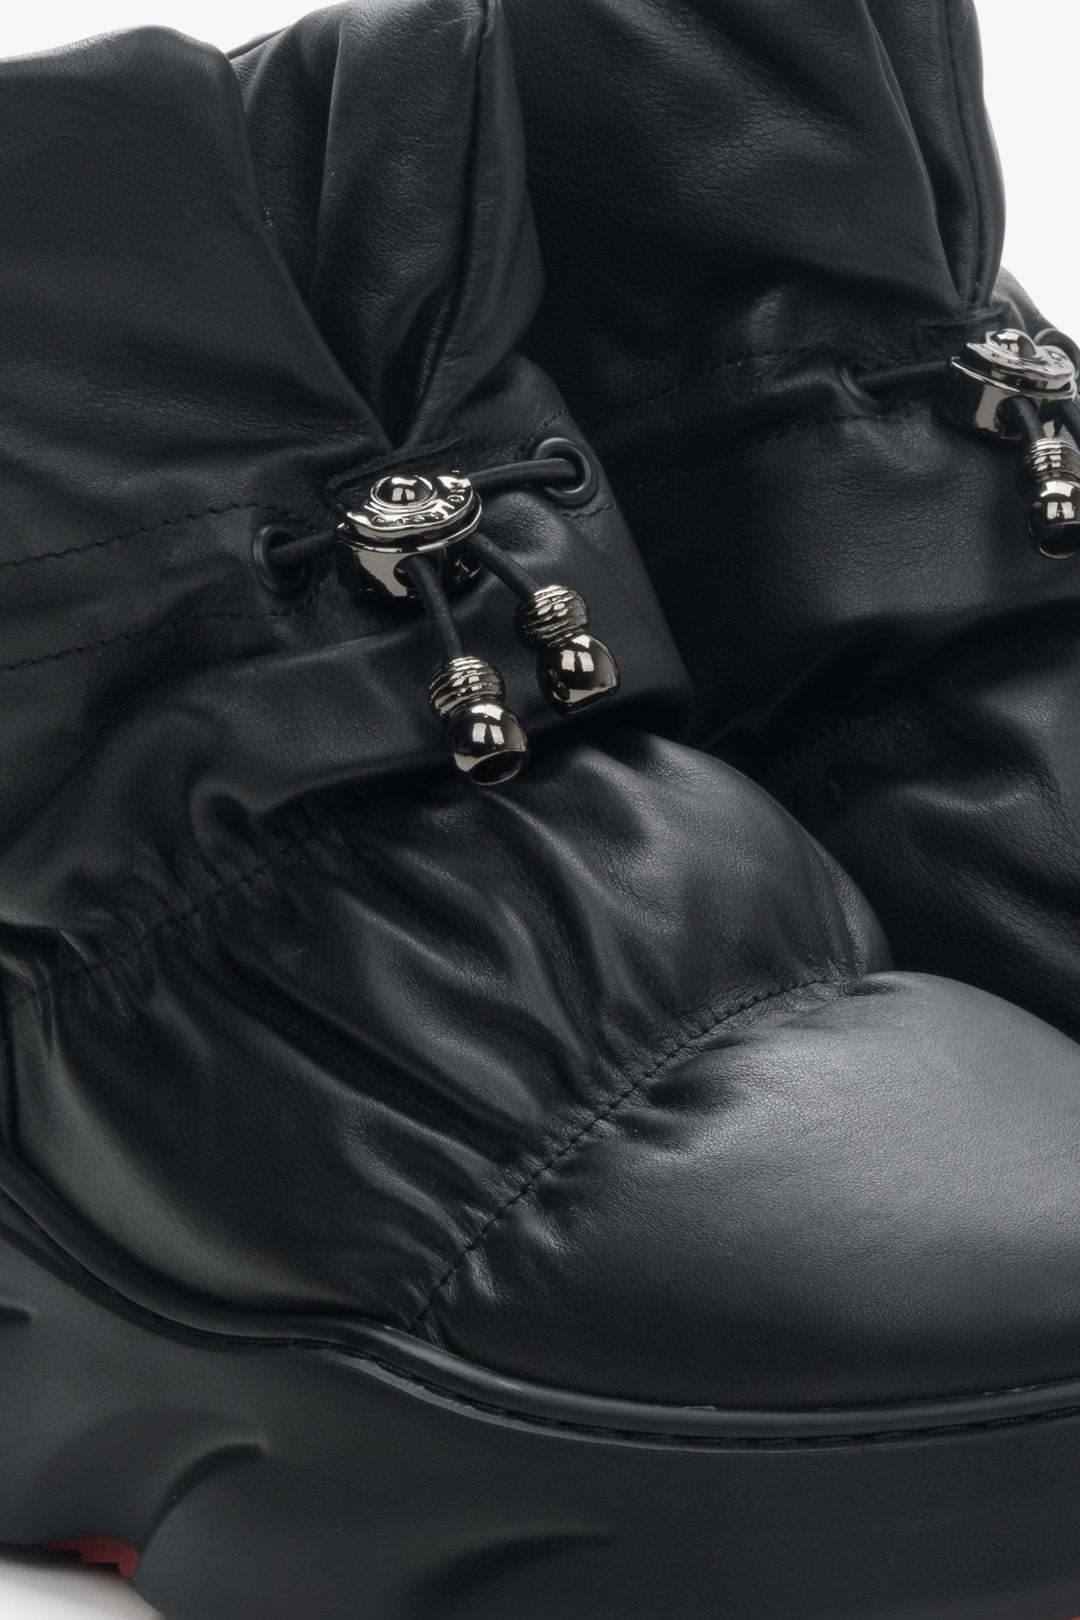 Women's black winter snow boots with leather and fur - close-up on golden details.